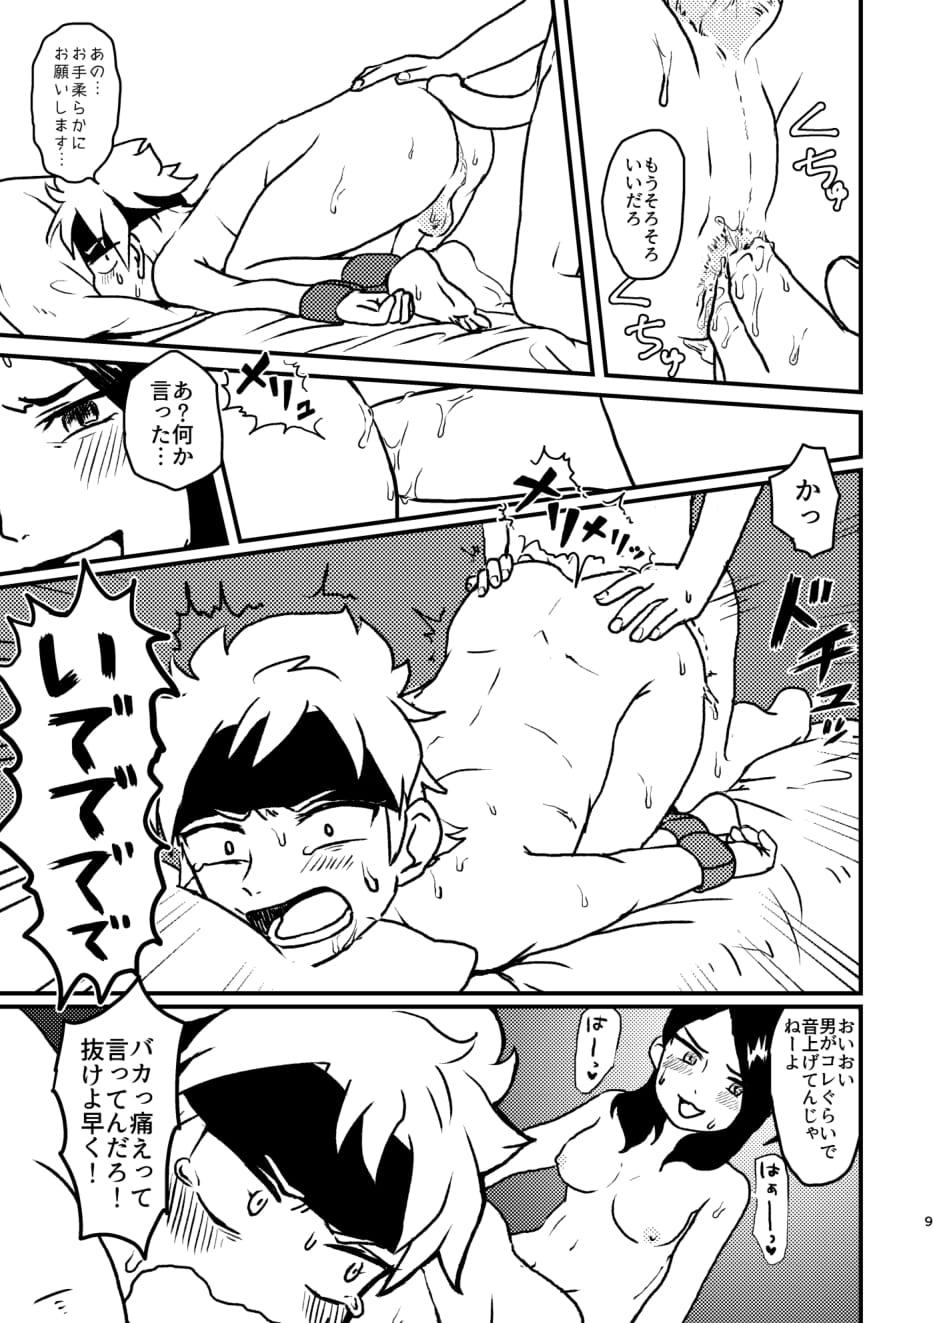 Branquinha Don't Stop! Minori-chan - Inazuma eleven go Ass To Mouth - Page 9